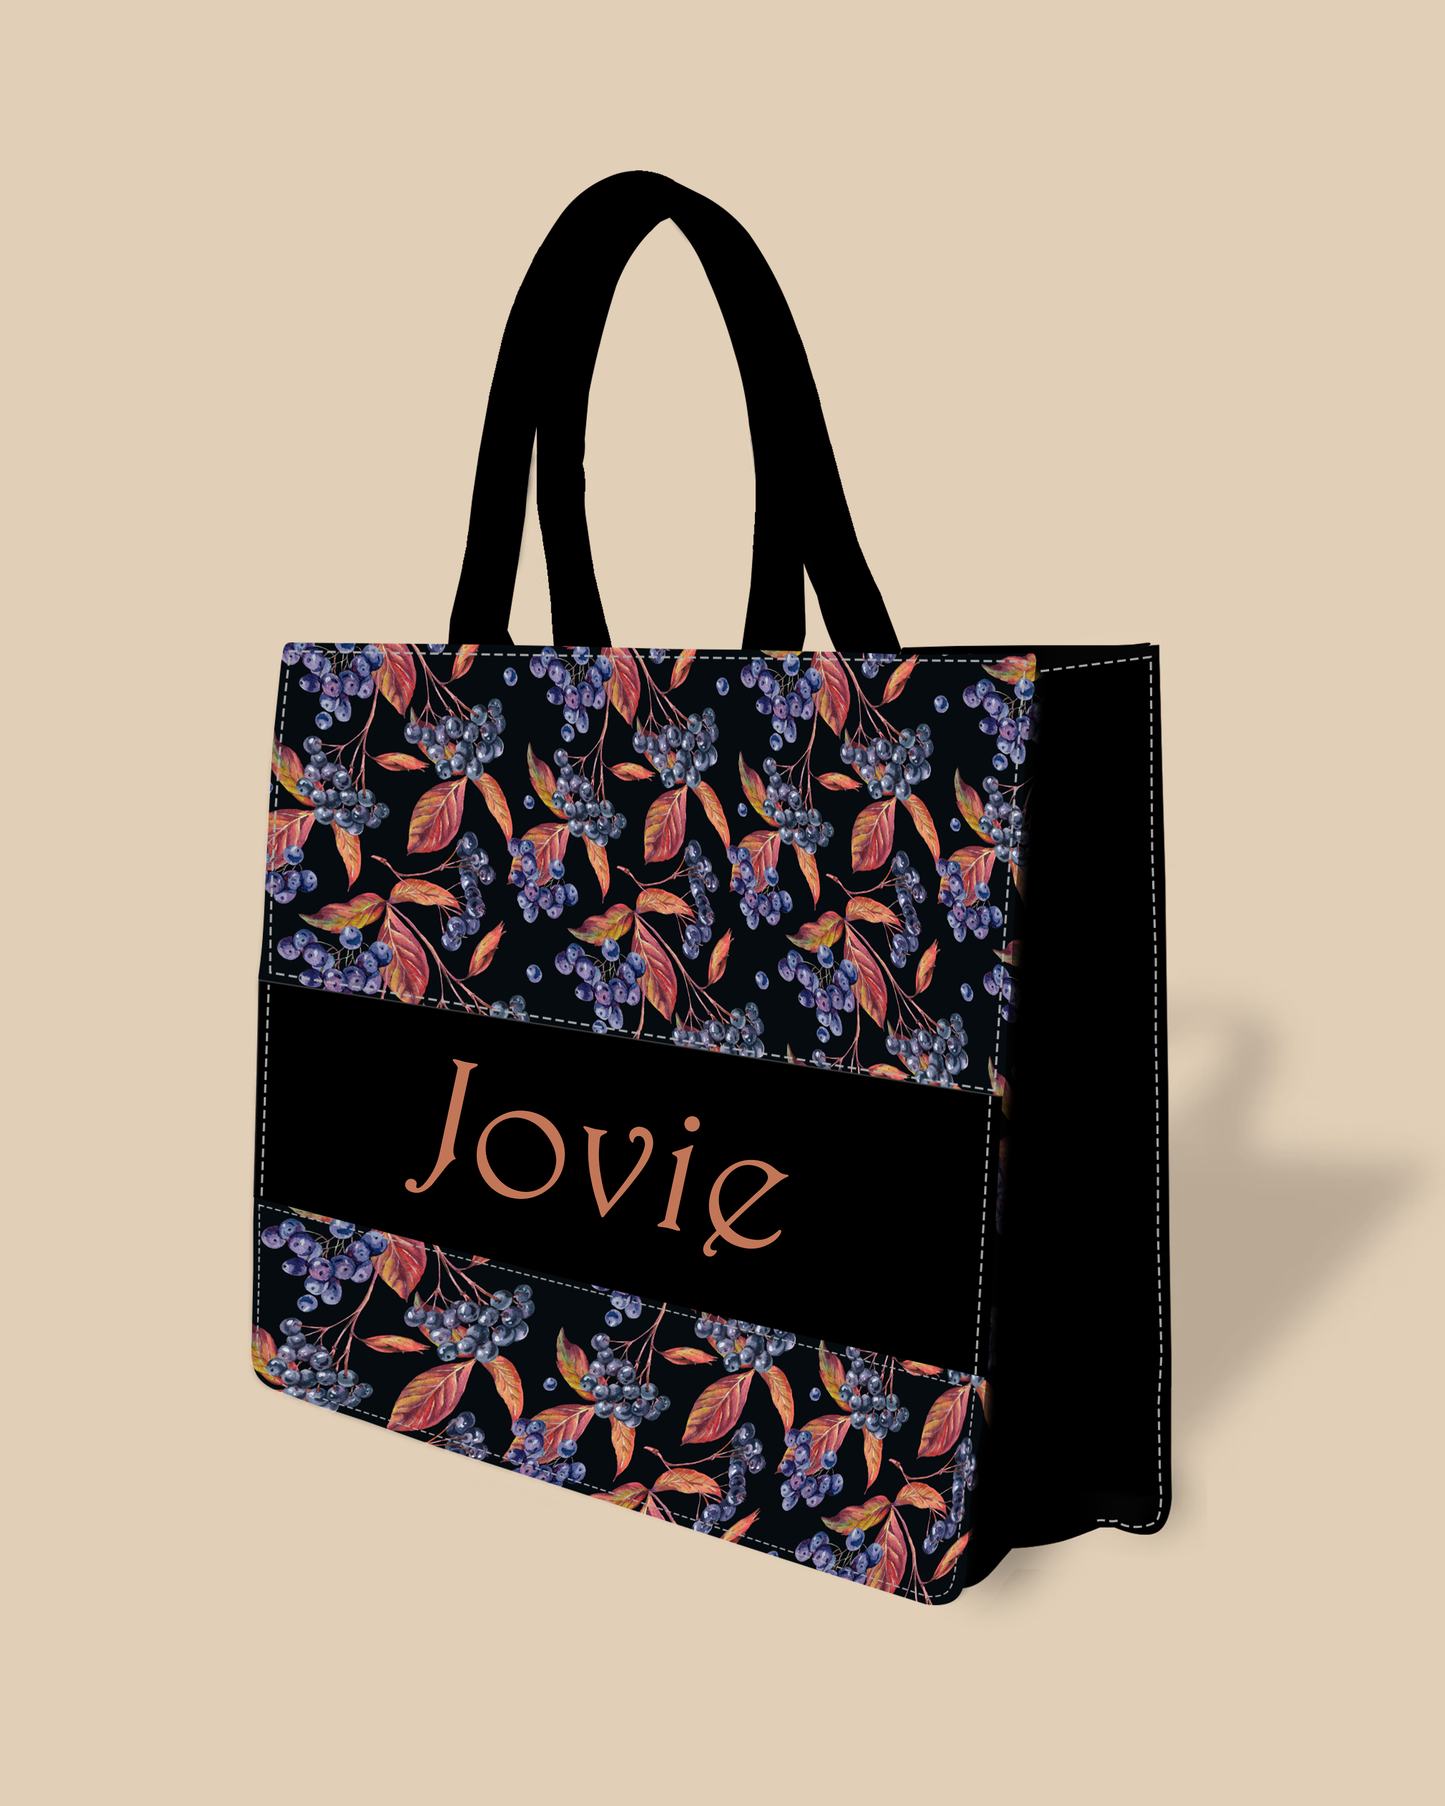 Personalized Tote Bag Designed with Grapes And Leaf Pattern